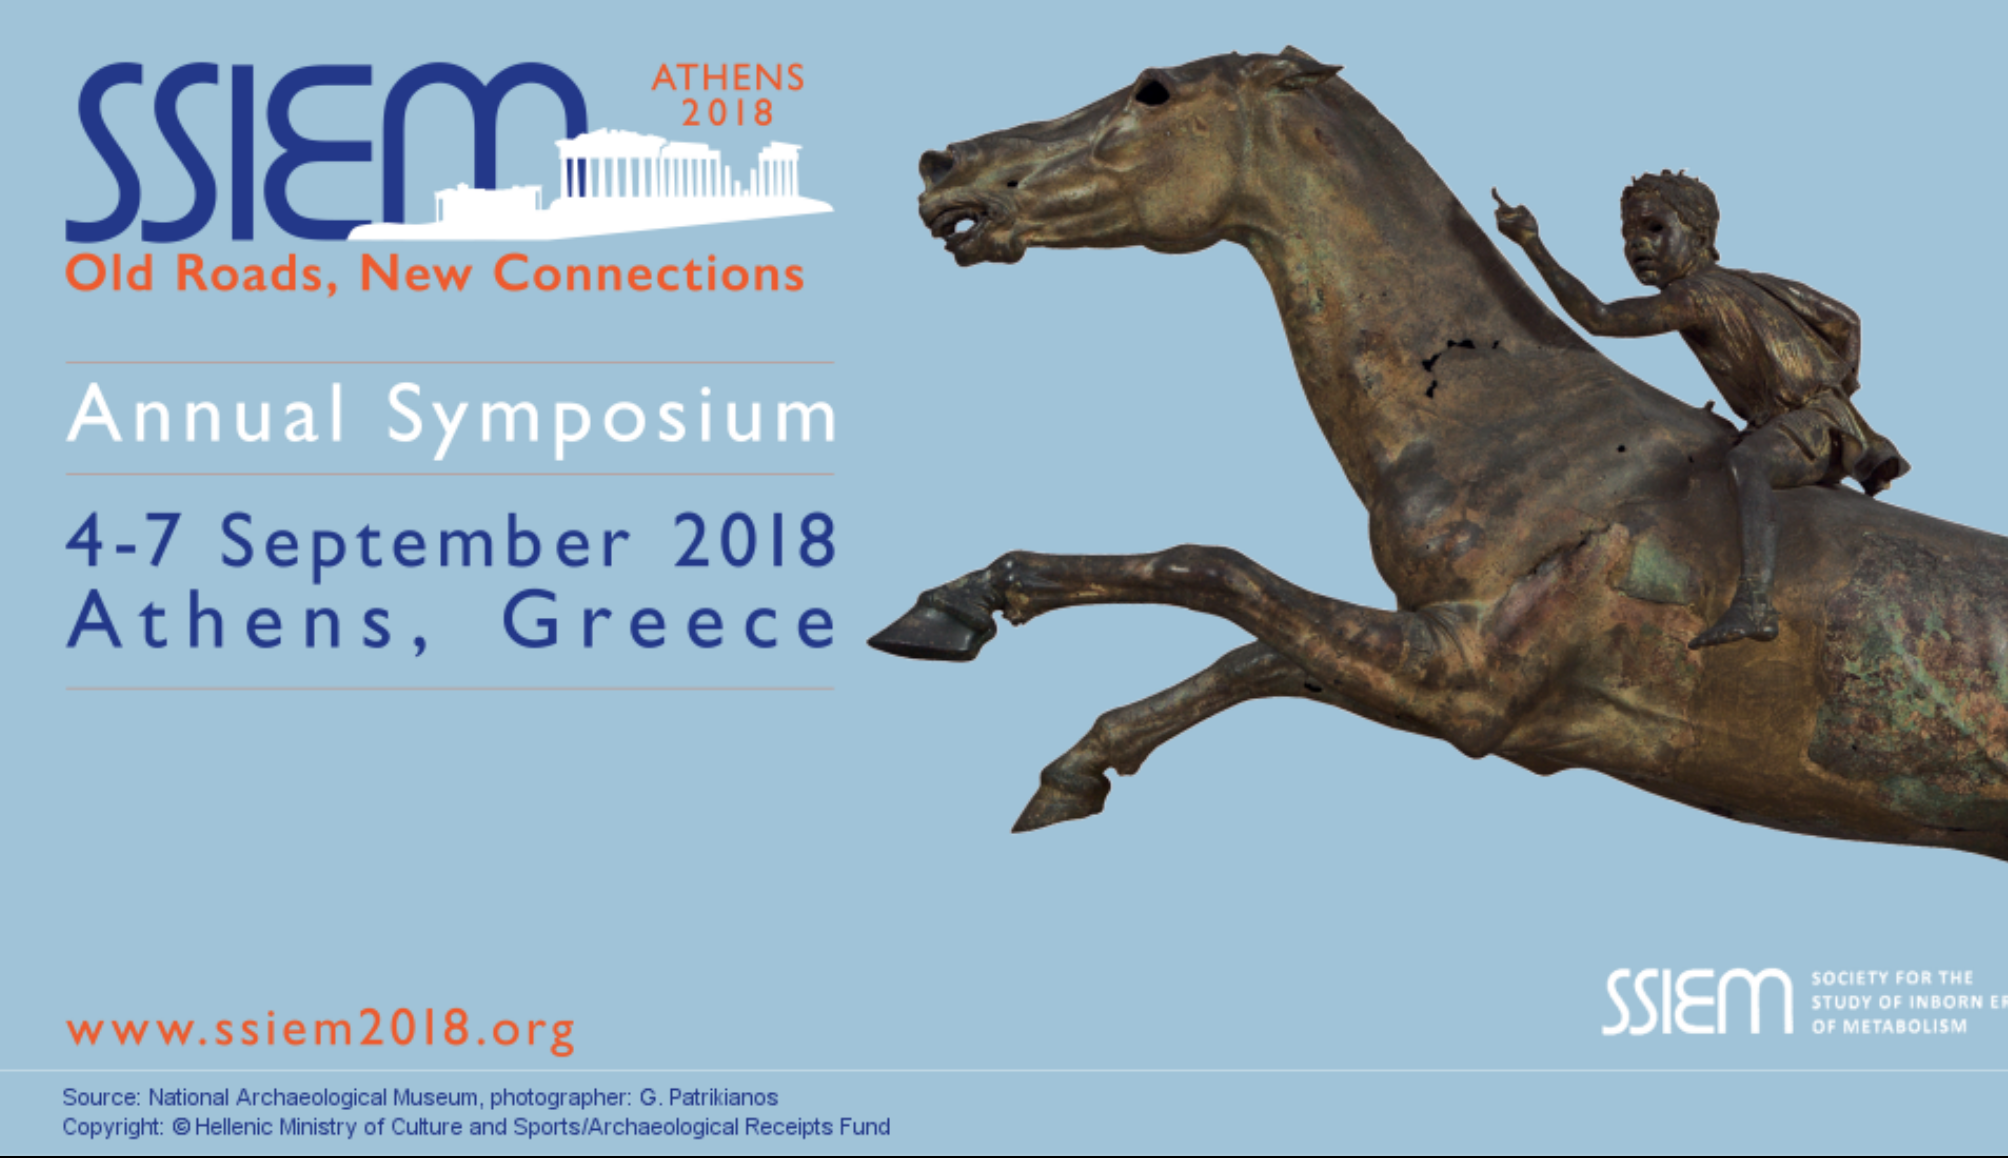 SSIEM ANNUAL SYMPOSIUM “Old Roads, New Connections” MetabERN